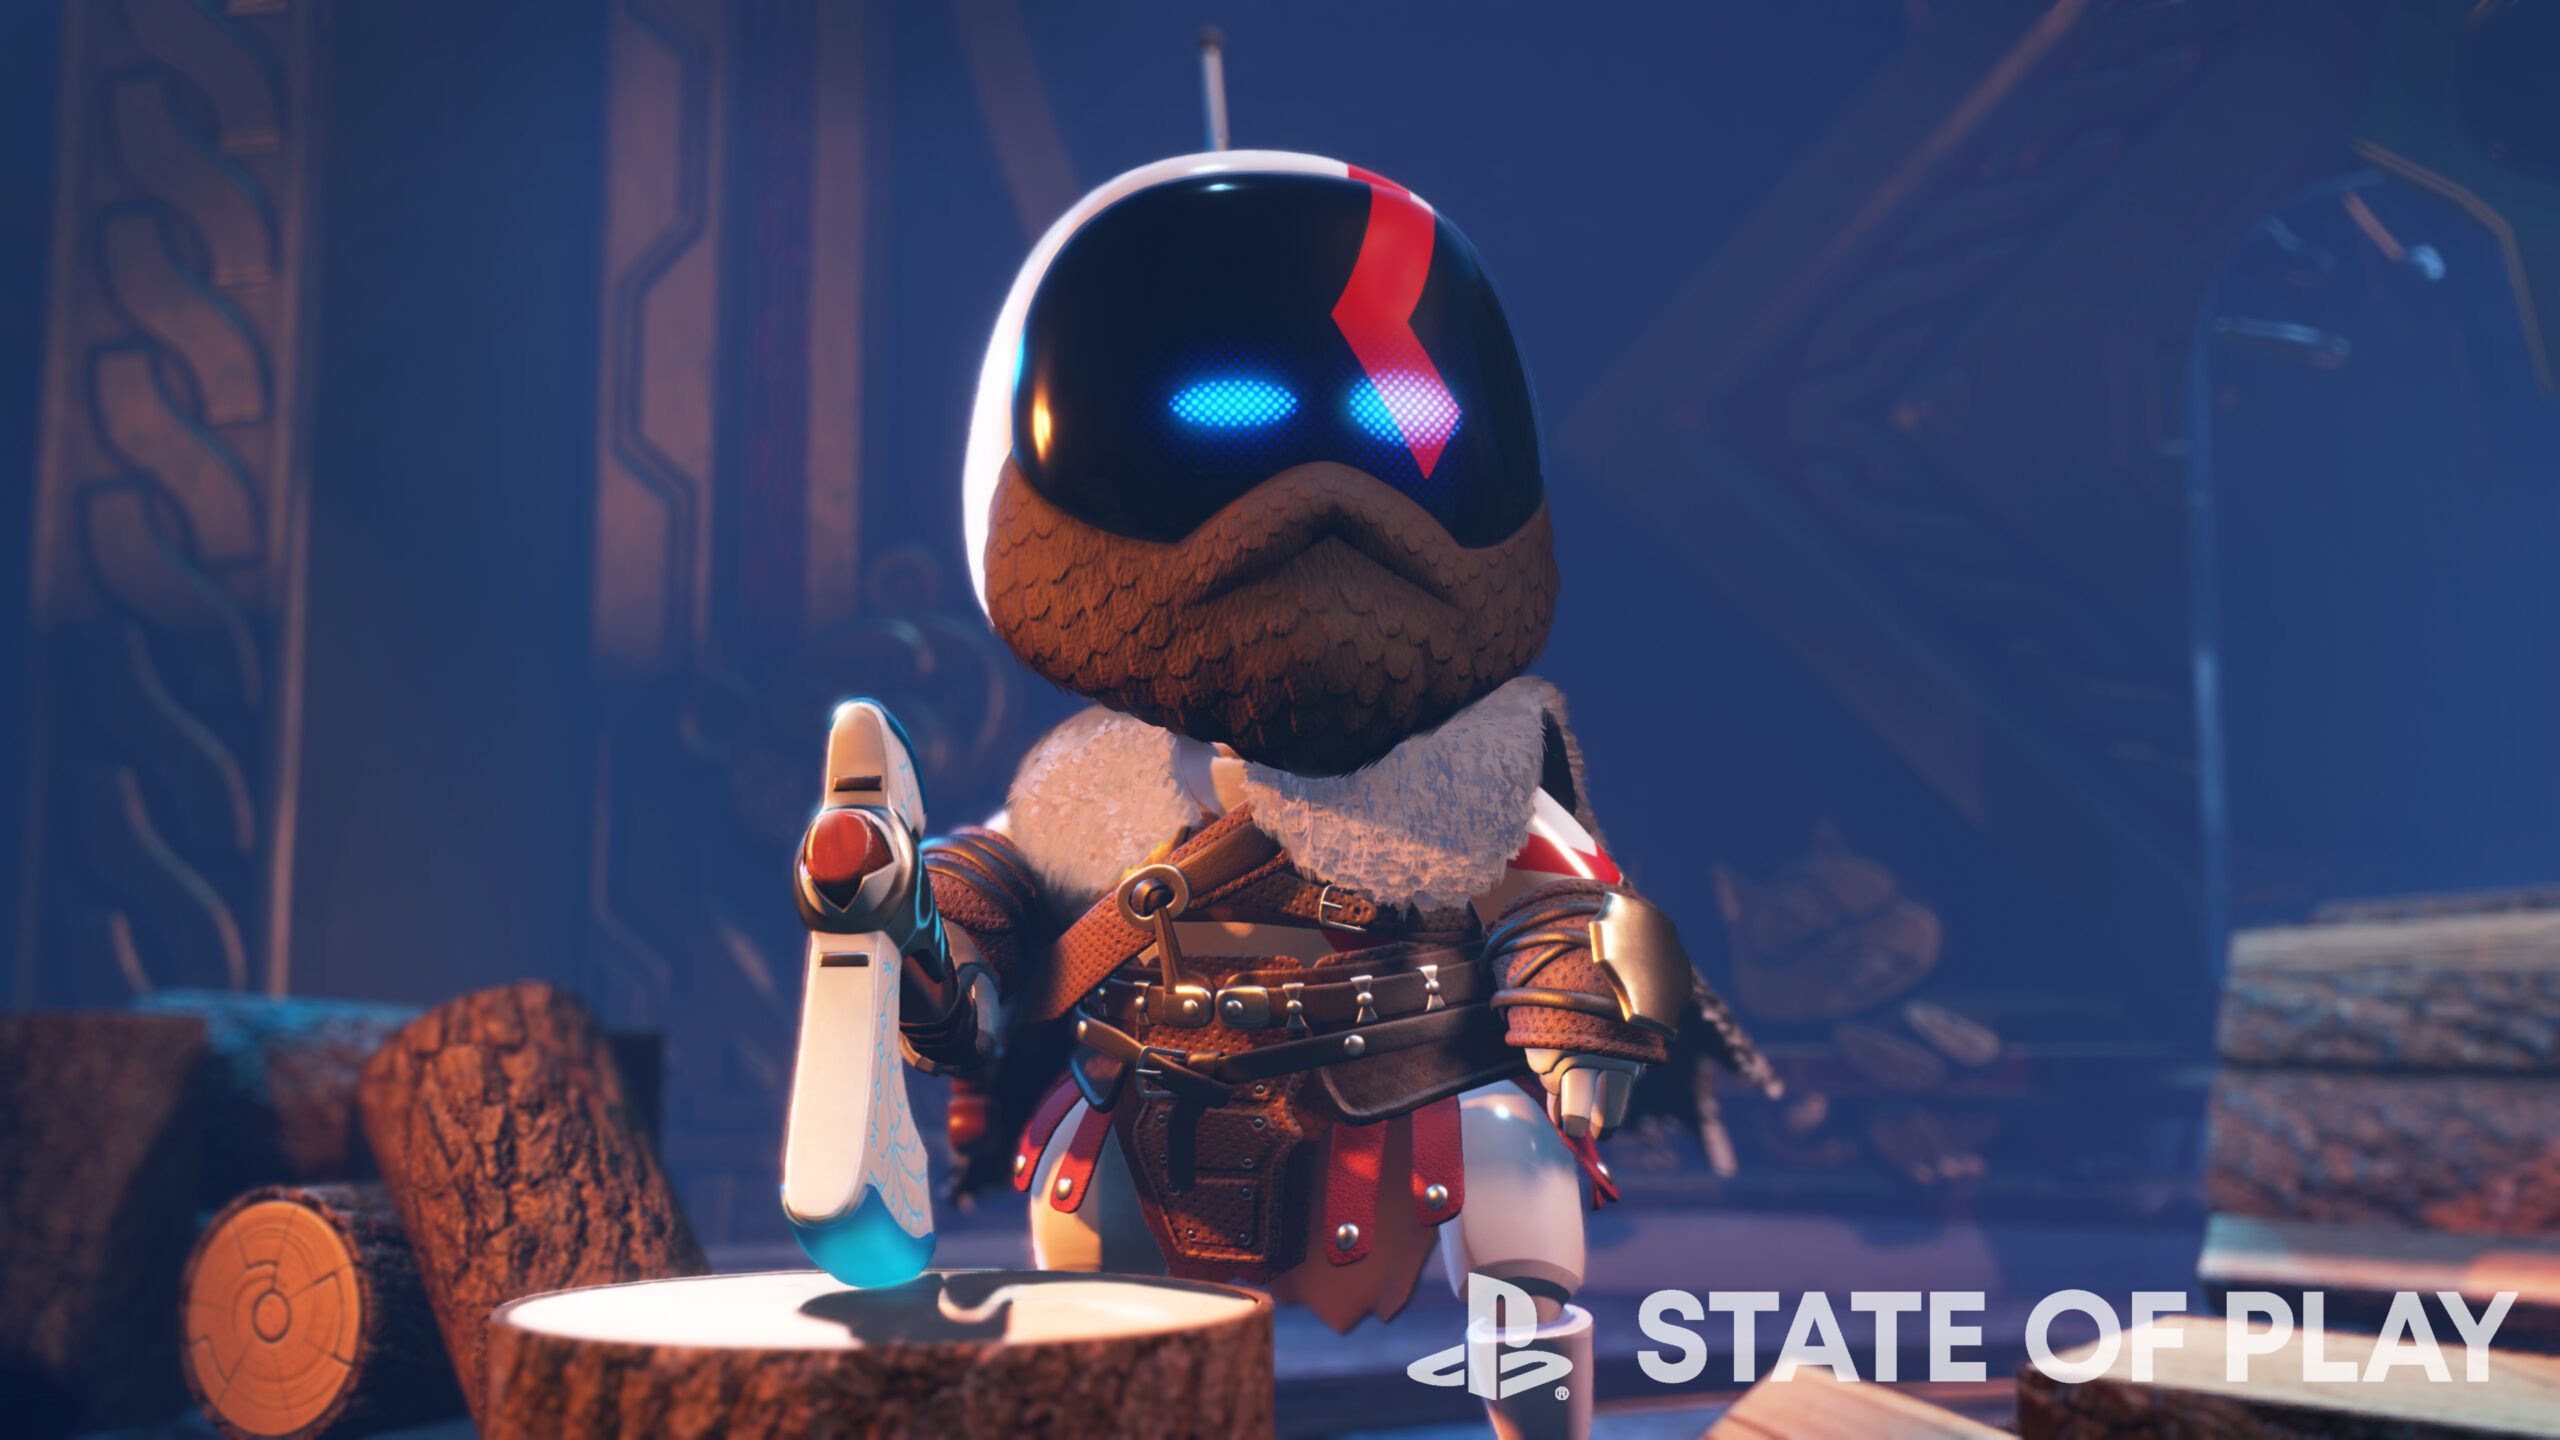 PlayStation State of Play: New Releases and Trailers for Astro Bot, Concord, God of War Ragnarok, and More